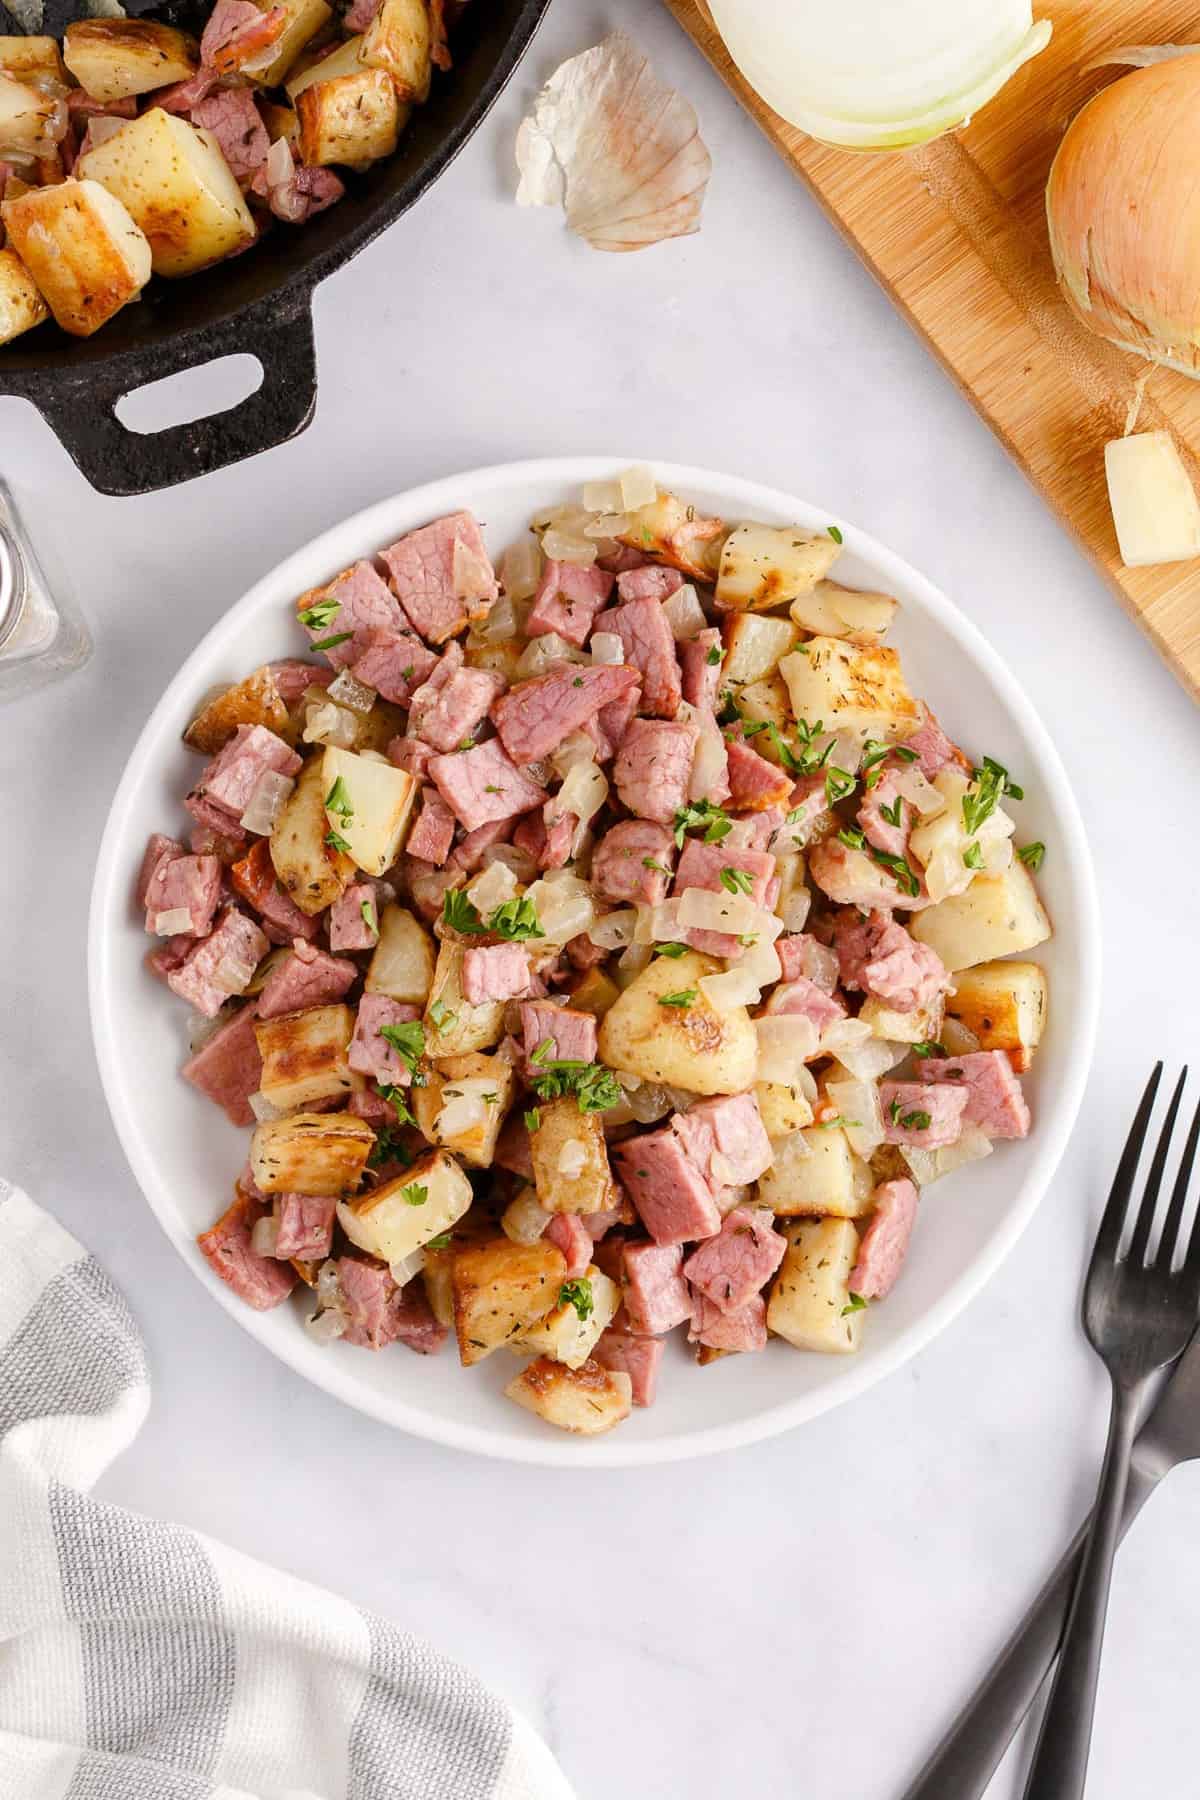 Corned beef and potatoes on a serving plate.